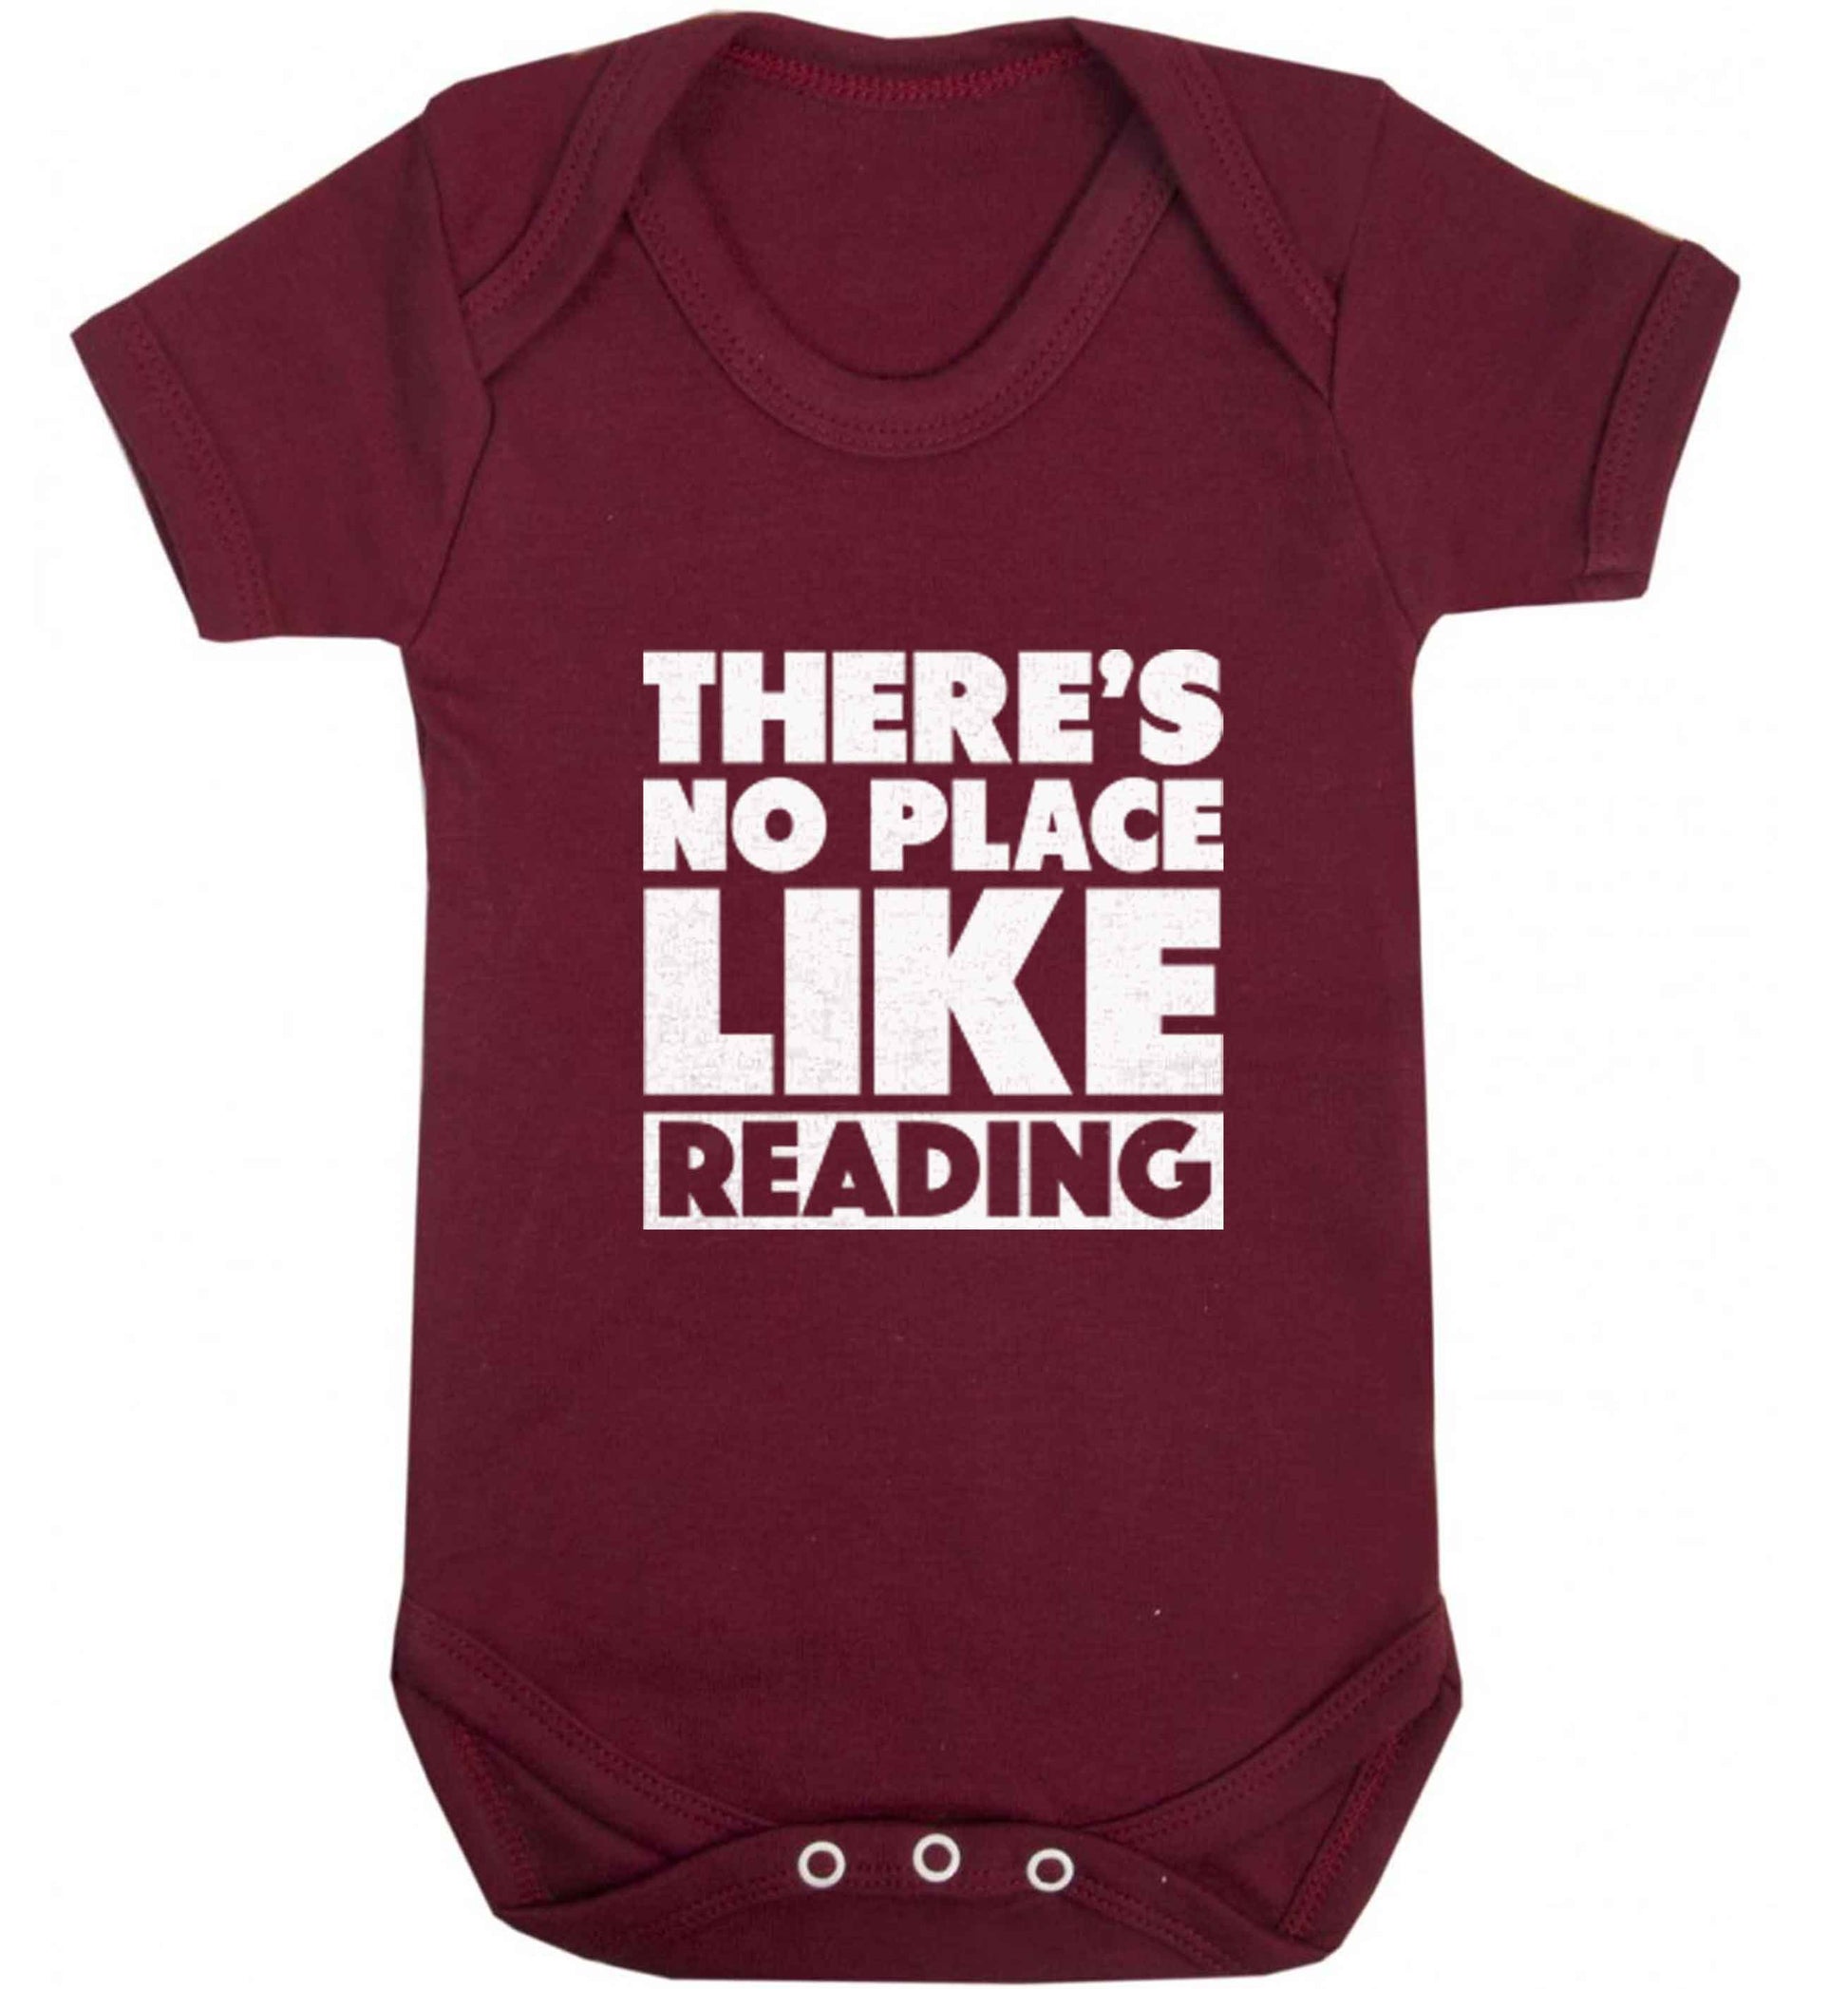 There's no place like Readingbaby vest maroon 18-24 months